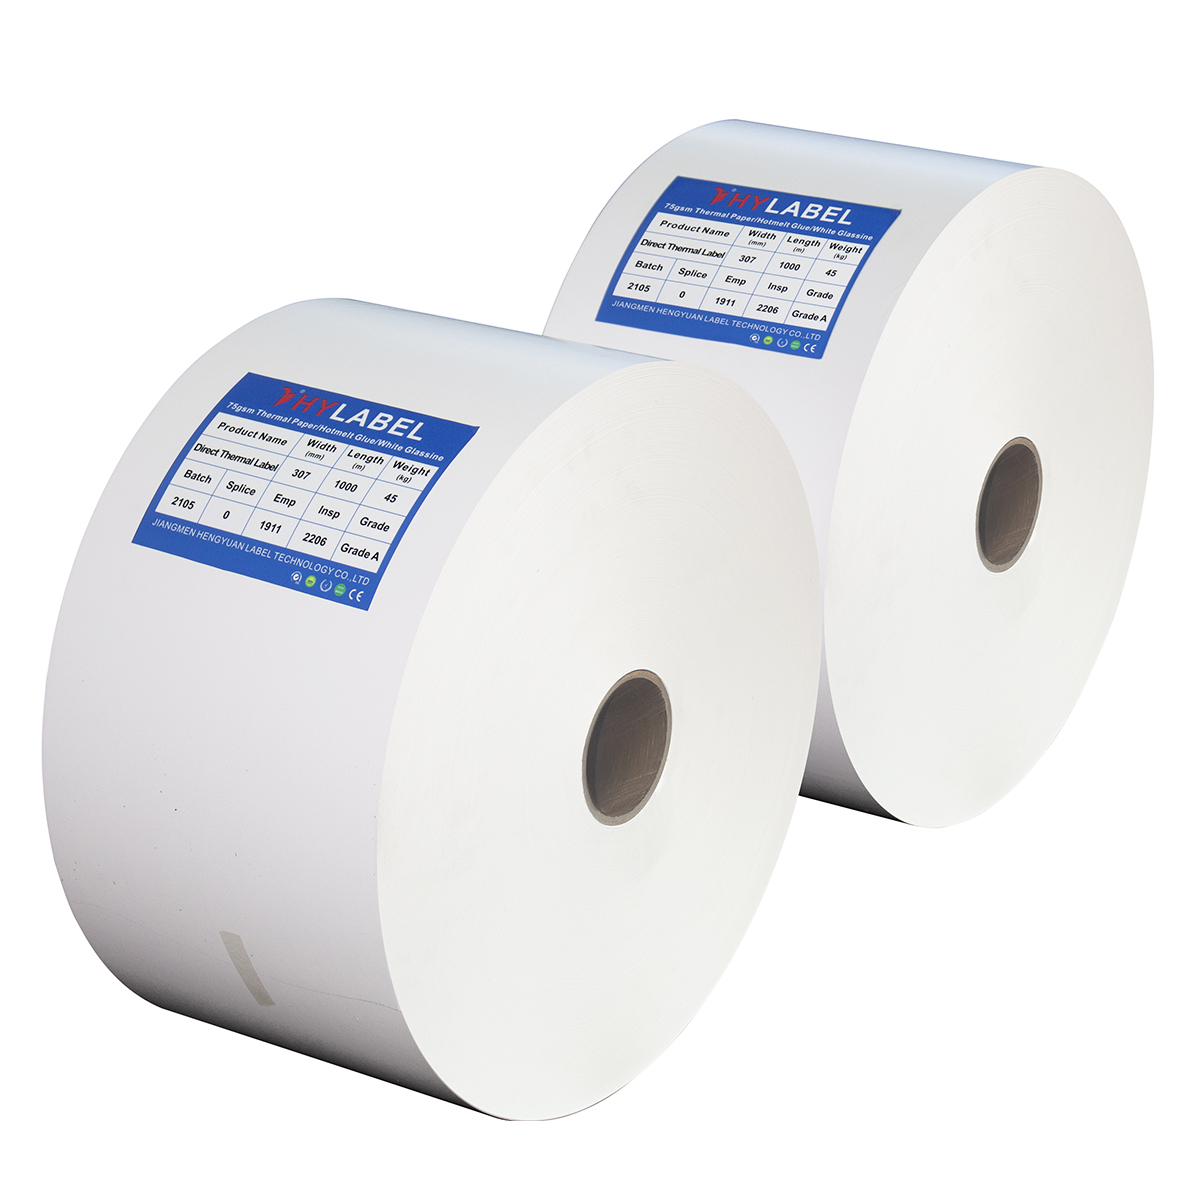 White 80gsm Coated Art Paper Hot Melt Adhesive Thermal Transfer Self Adhesive Paper Label Jumbo Sticker Roll